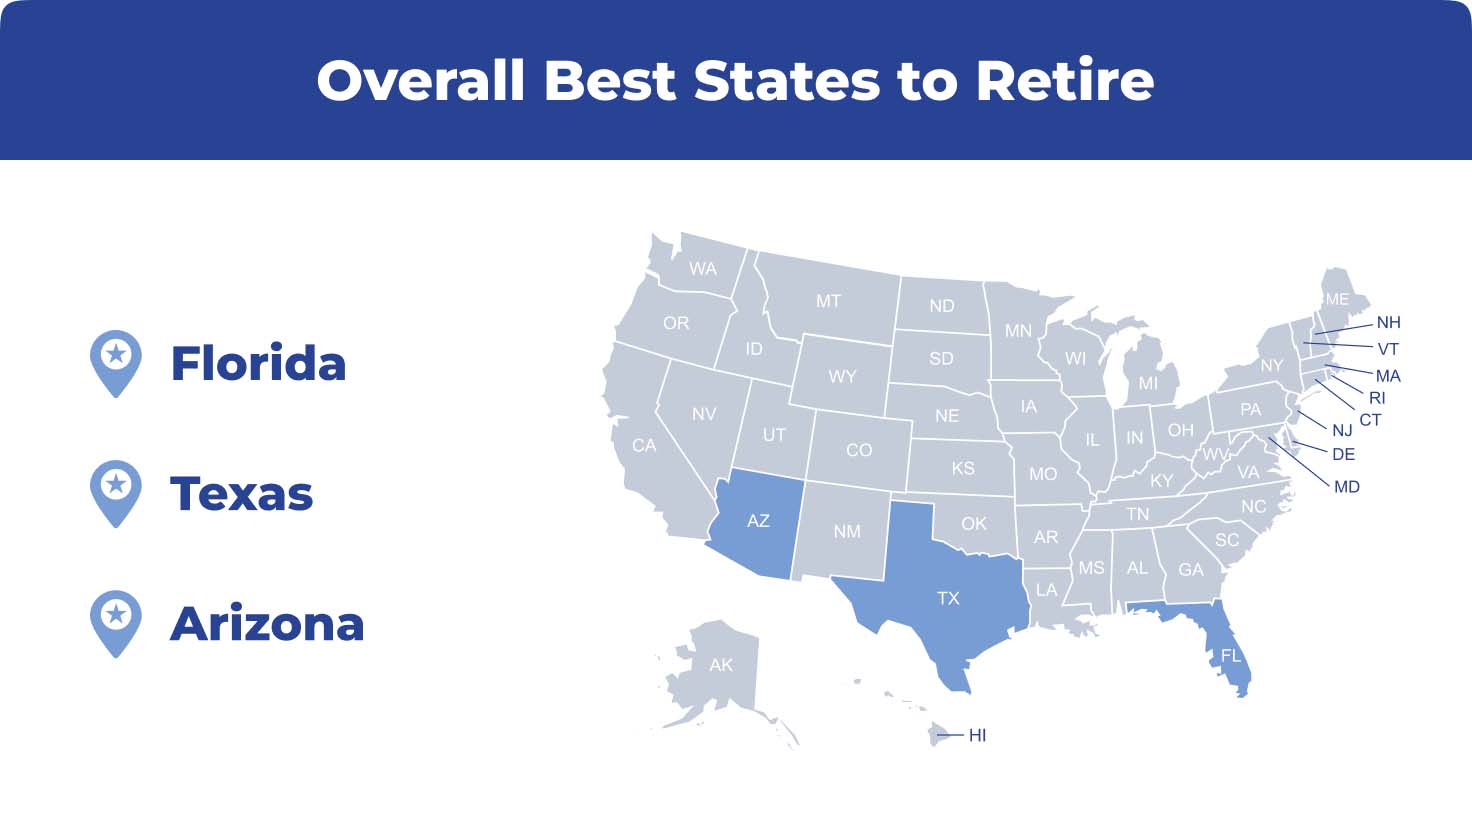 top 3 overall retiree-friendly states